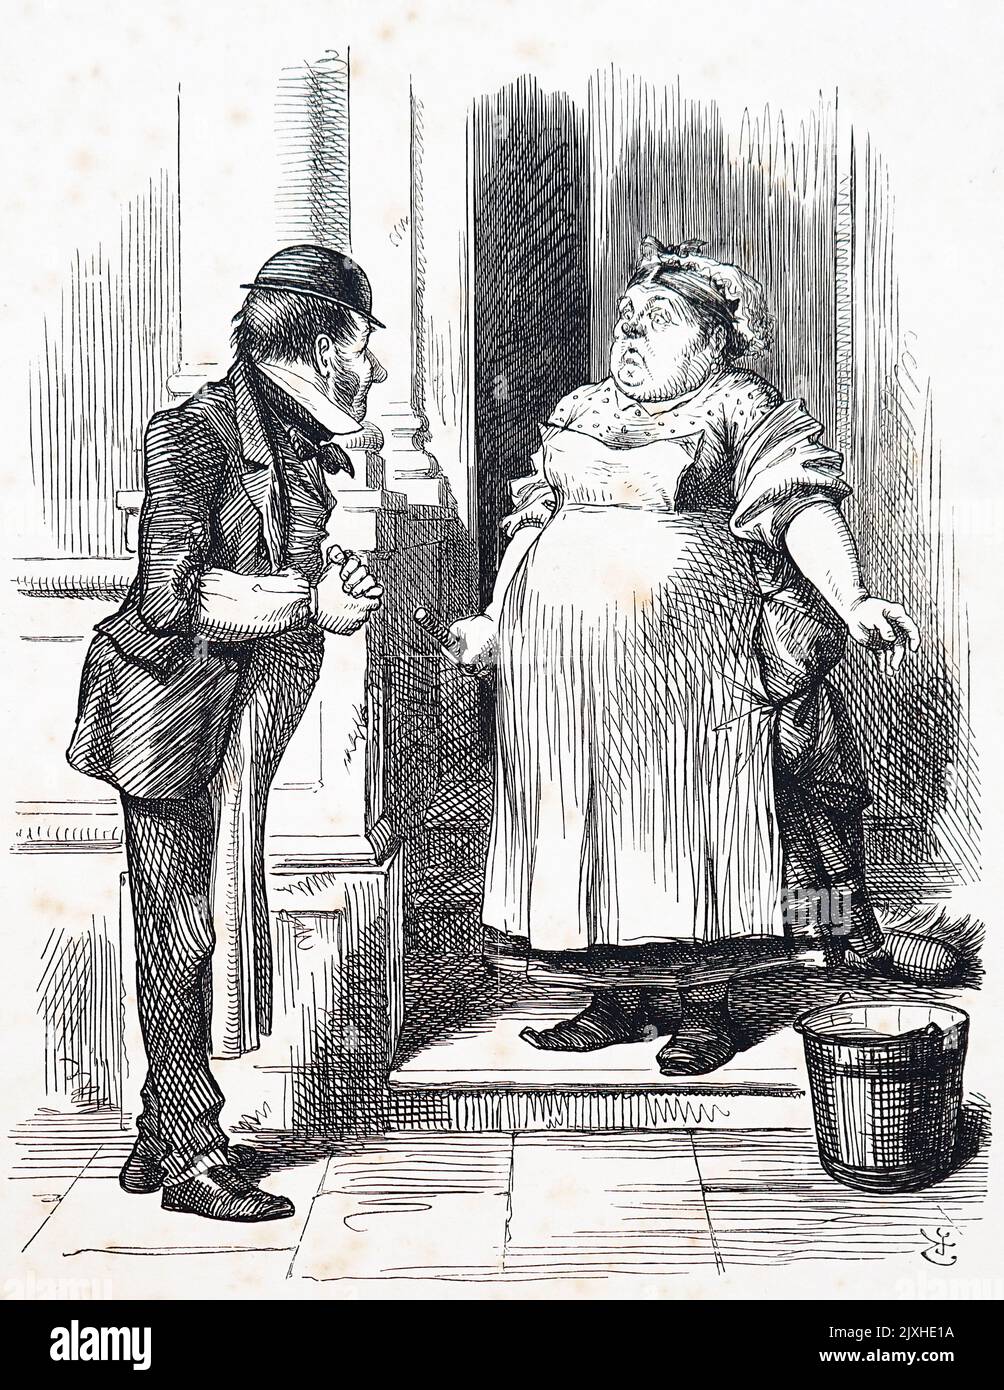 Illustration depicting an overweight maid opening the front door of the house she works in. Dated 19th Century Stock Photo